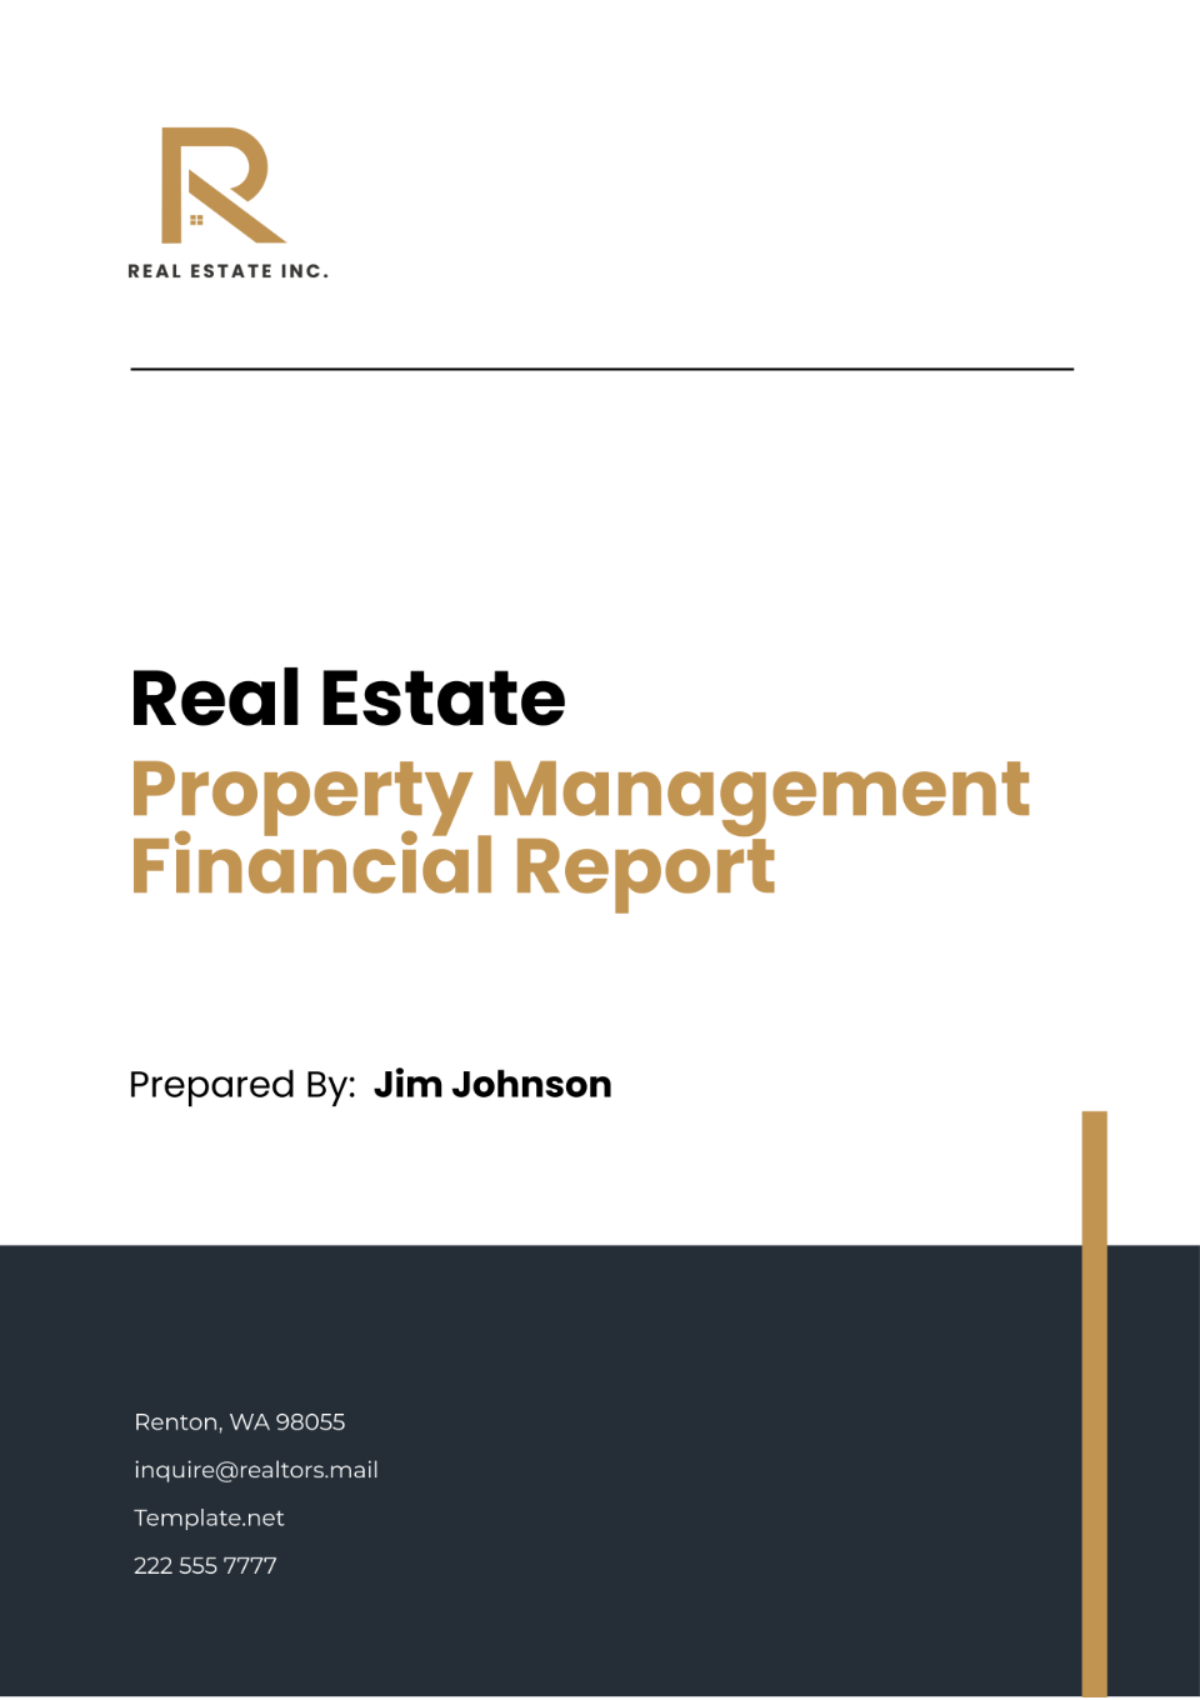 Free Real Estate Property Management Financial Report Template